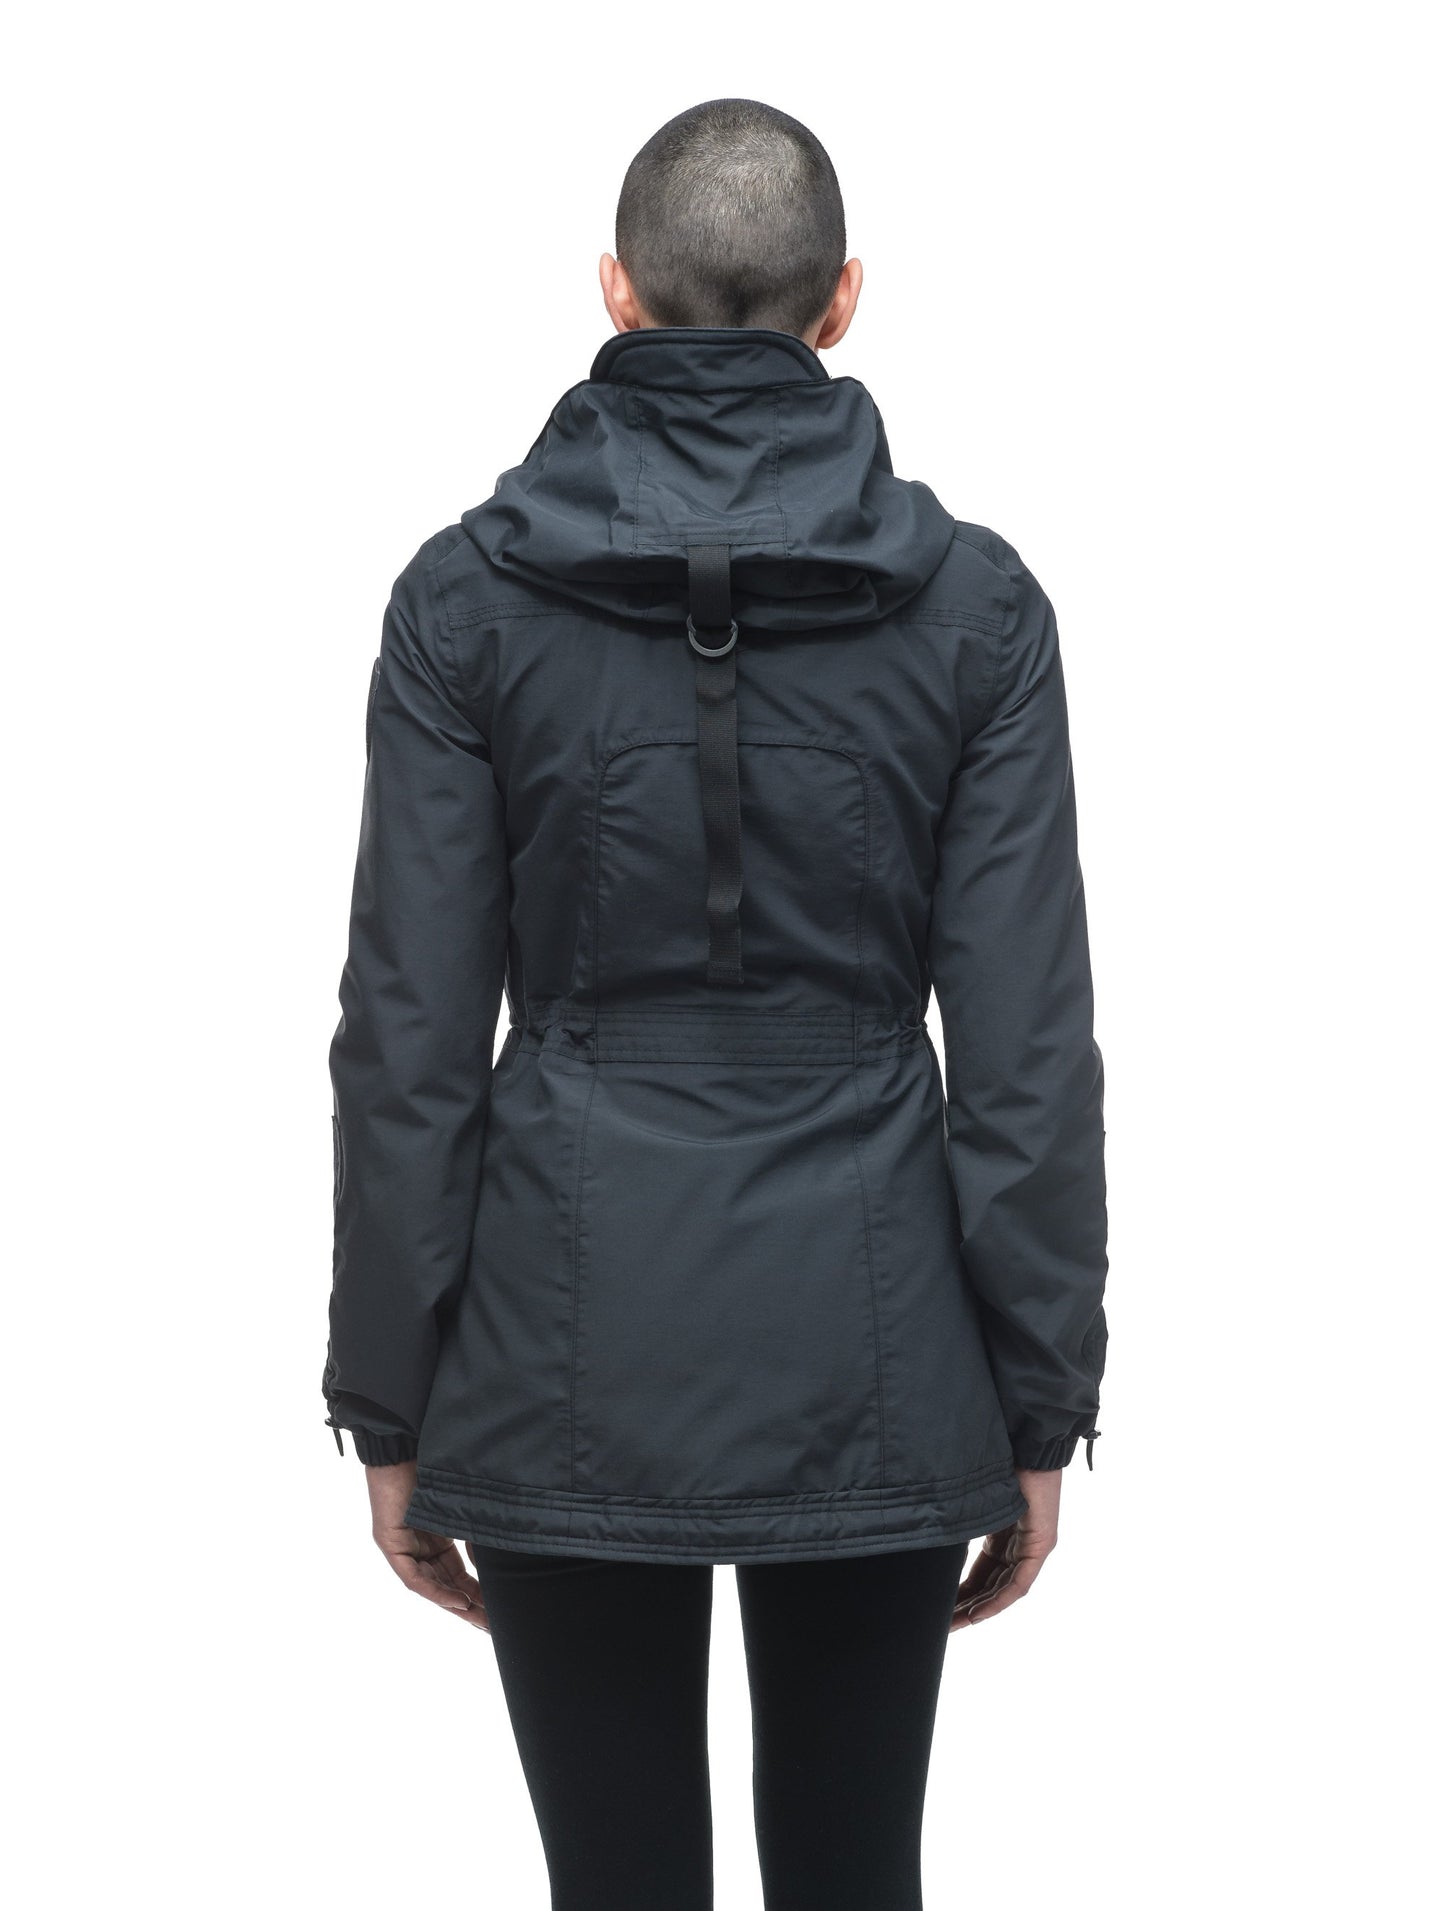 Women's hooded shirt jacket with four front pockets and adjustable waist in Black